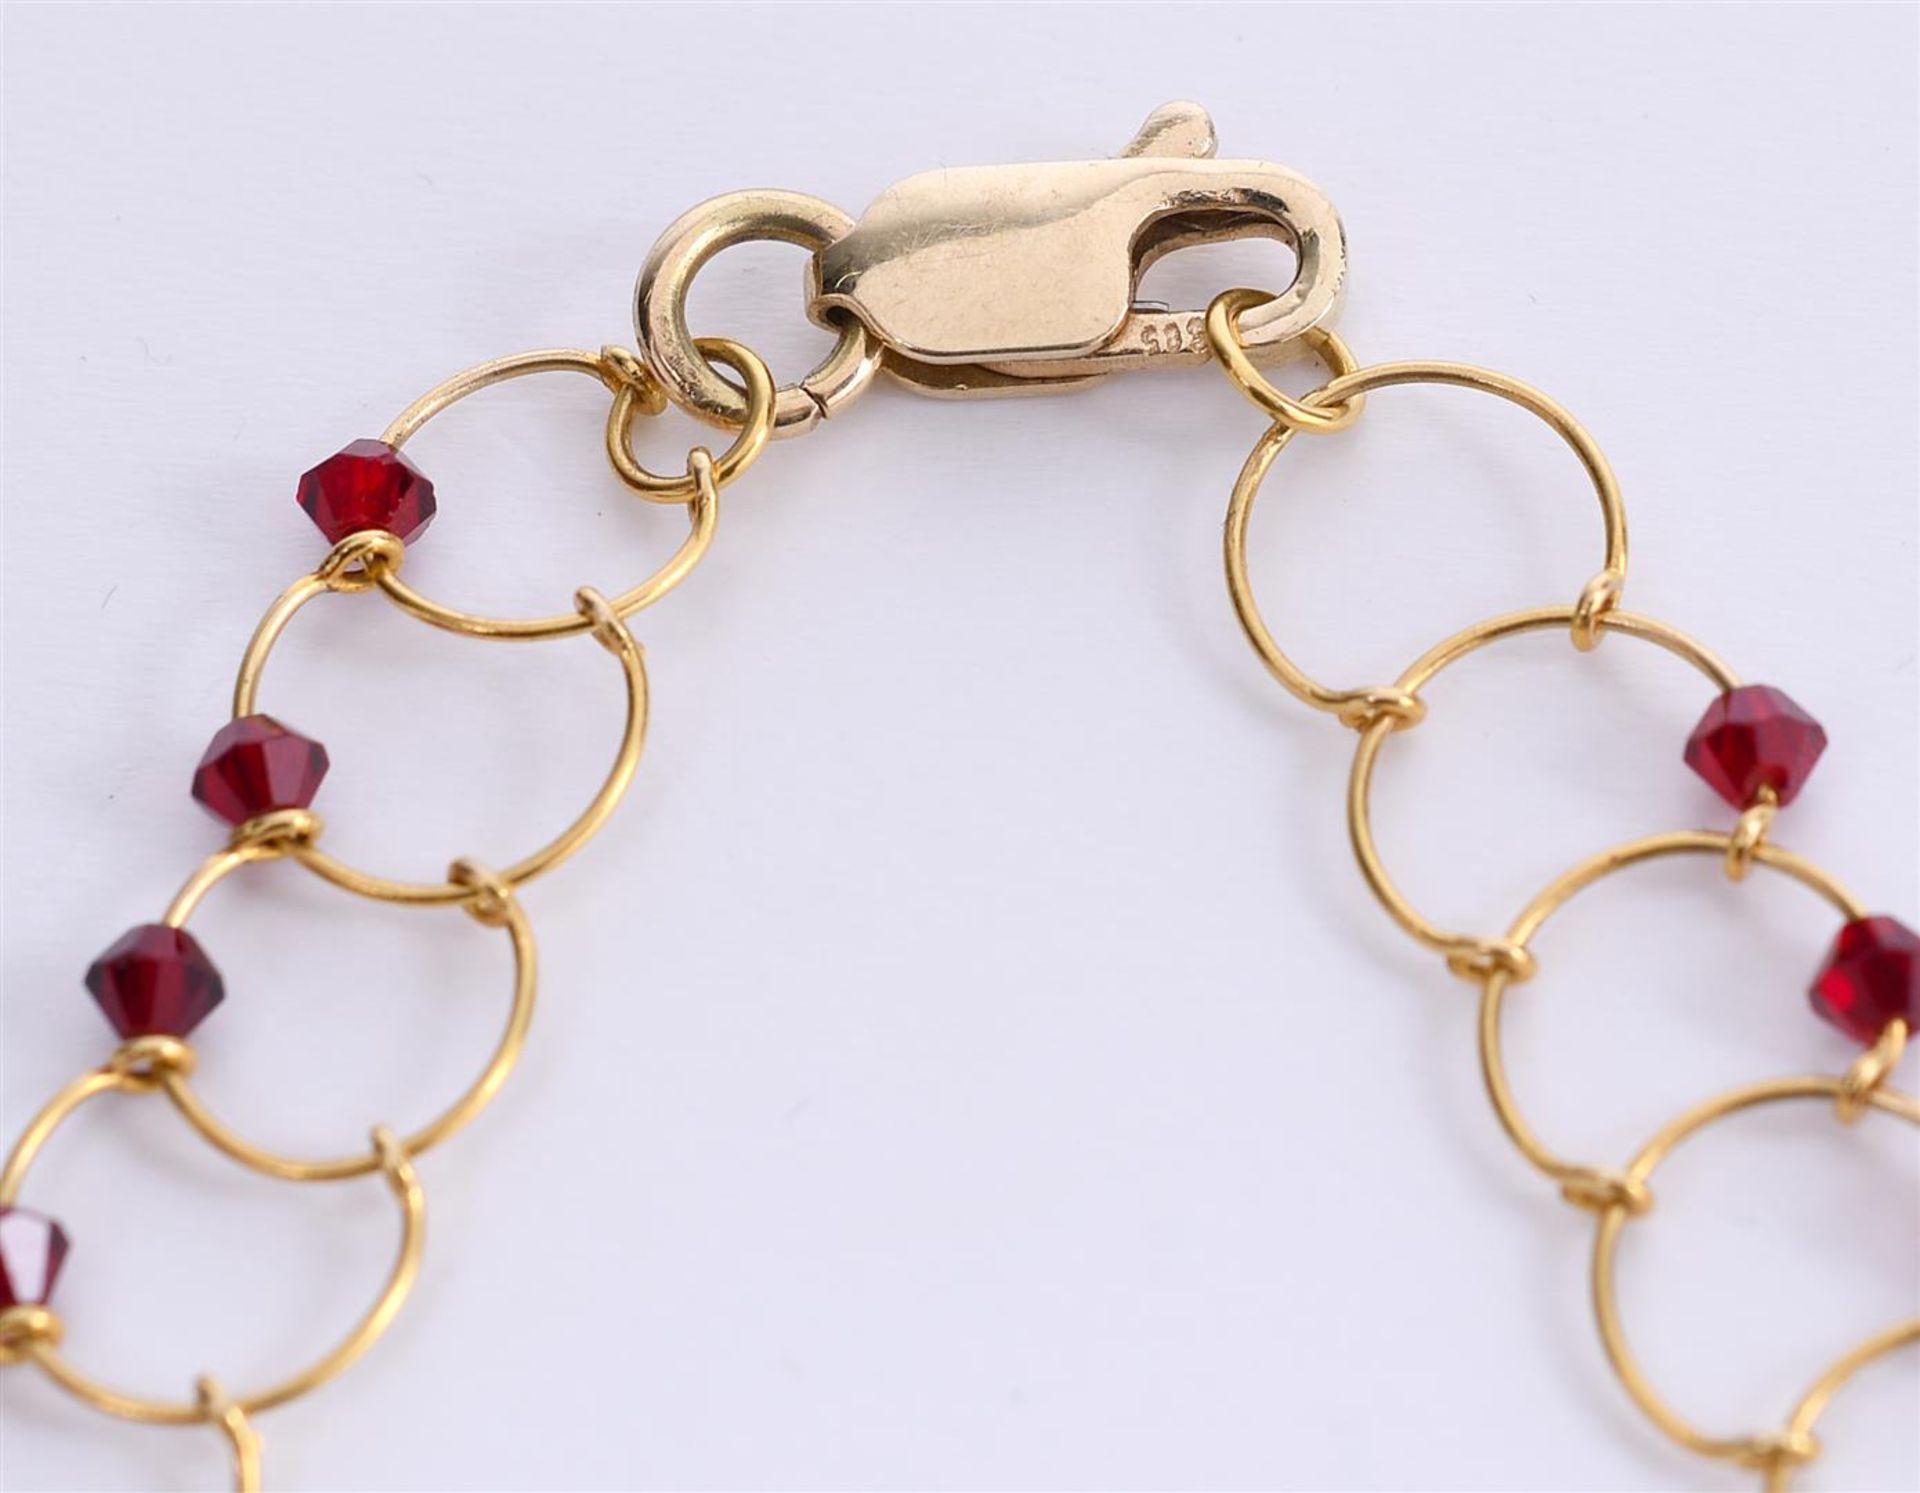 14 kt yellow gold wire necklace set with red crystal stones. Necklace length 41cm - Image 5 of 6